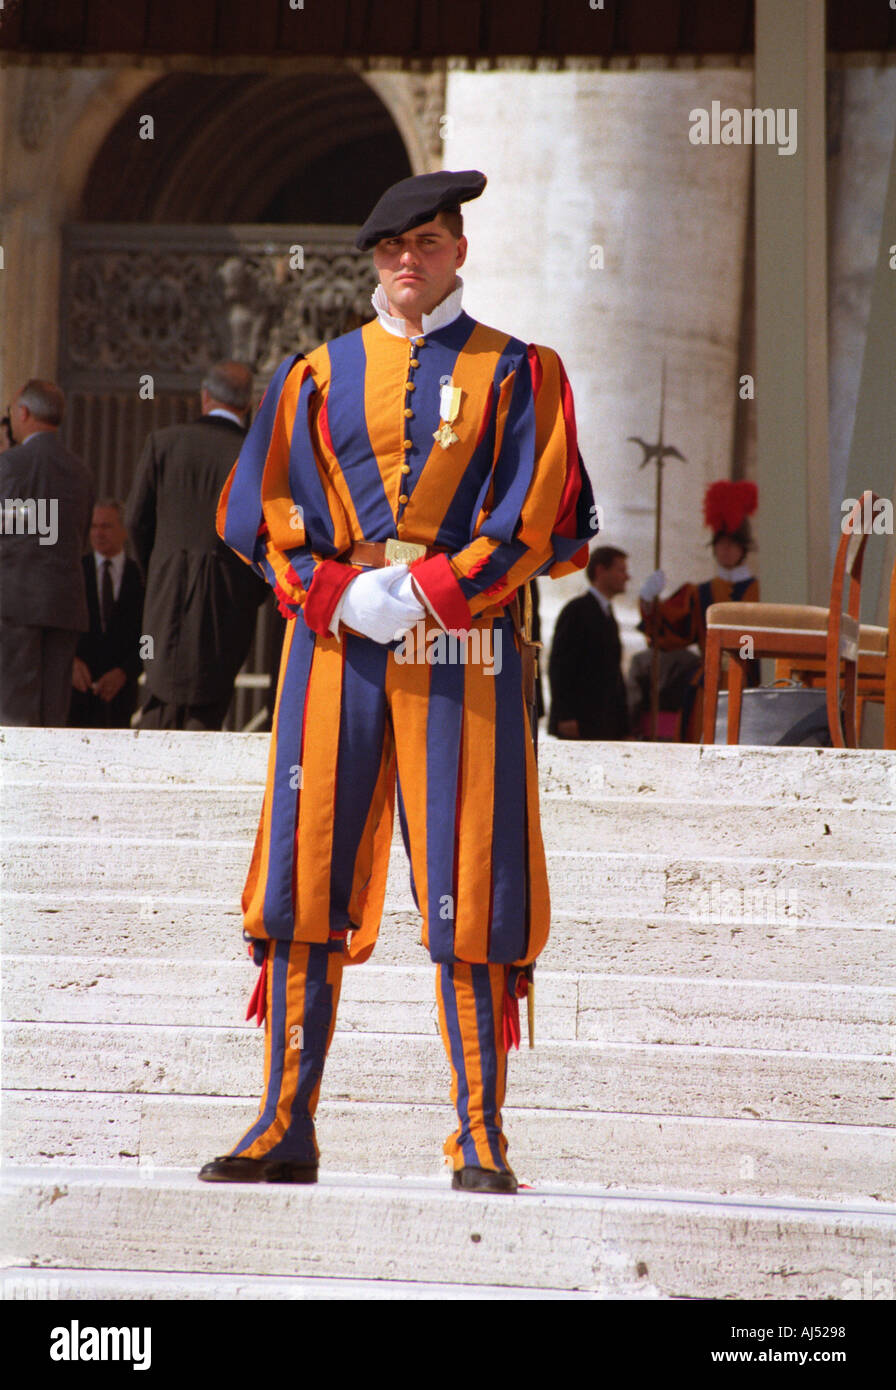 Swiss Guard on duty at the Vatican steps June 2003 Stock Photo